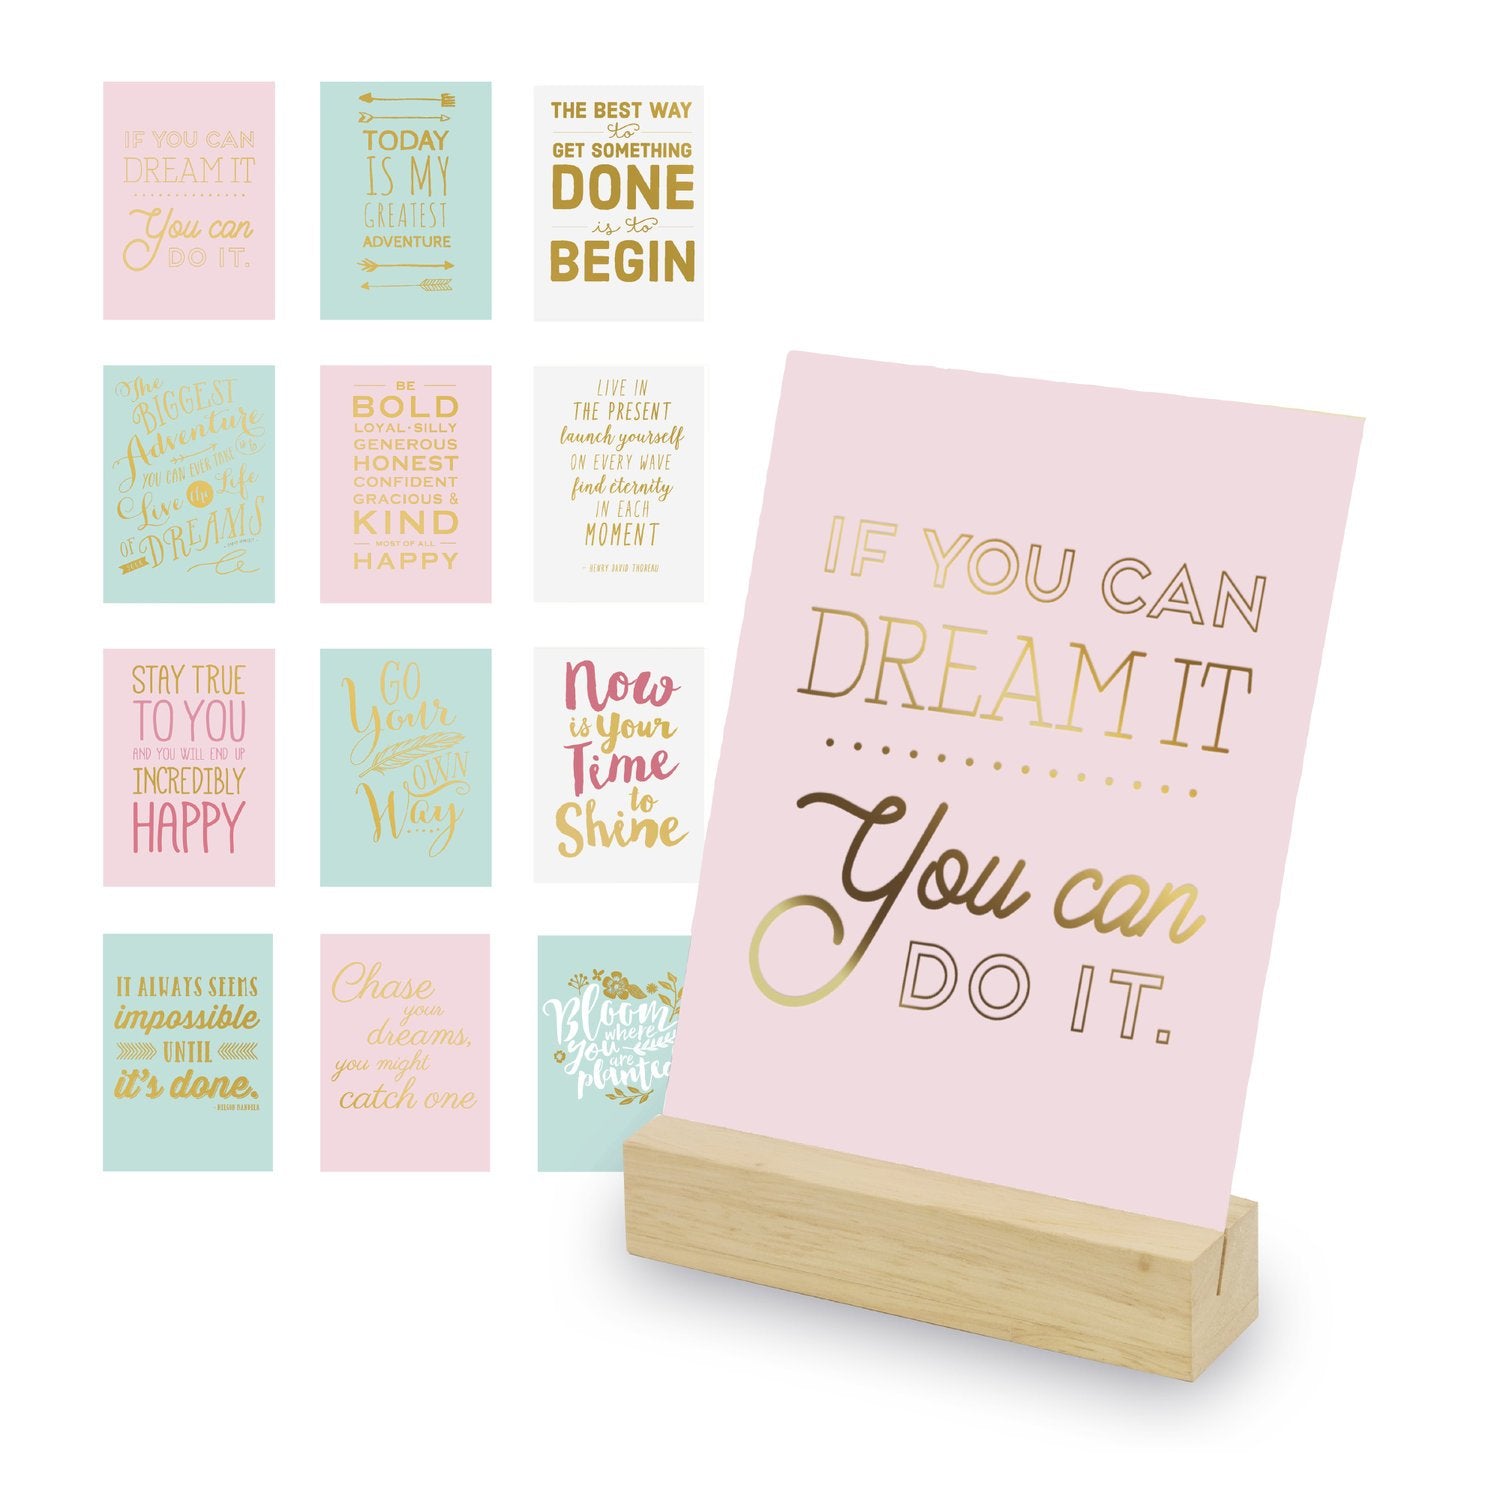 Eccolo Inspirational Cards Set for Self-Love and Mindfulness